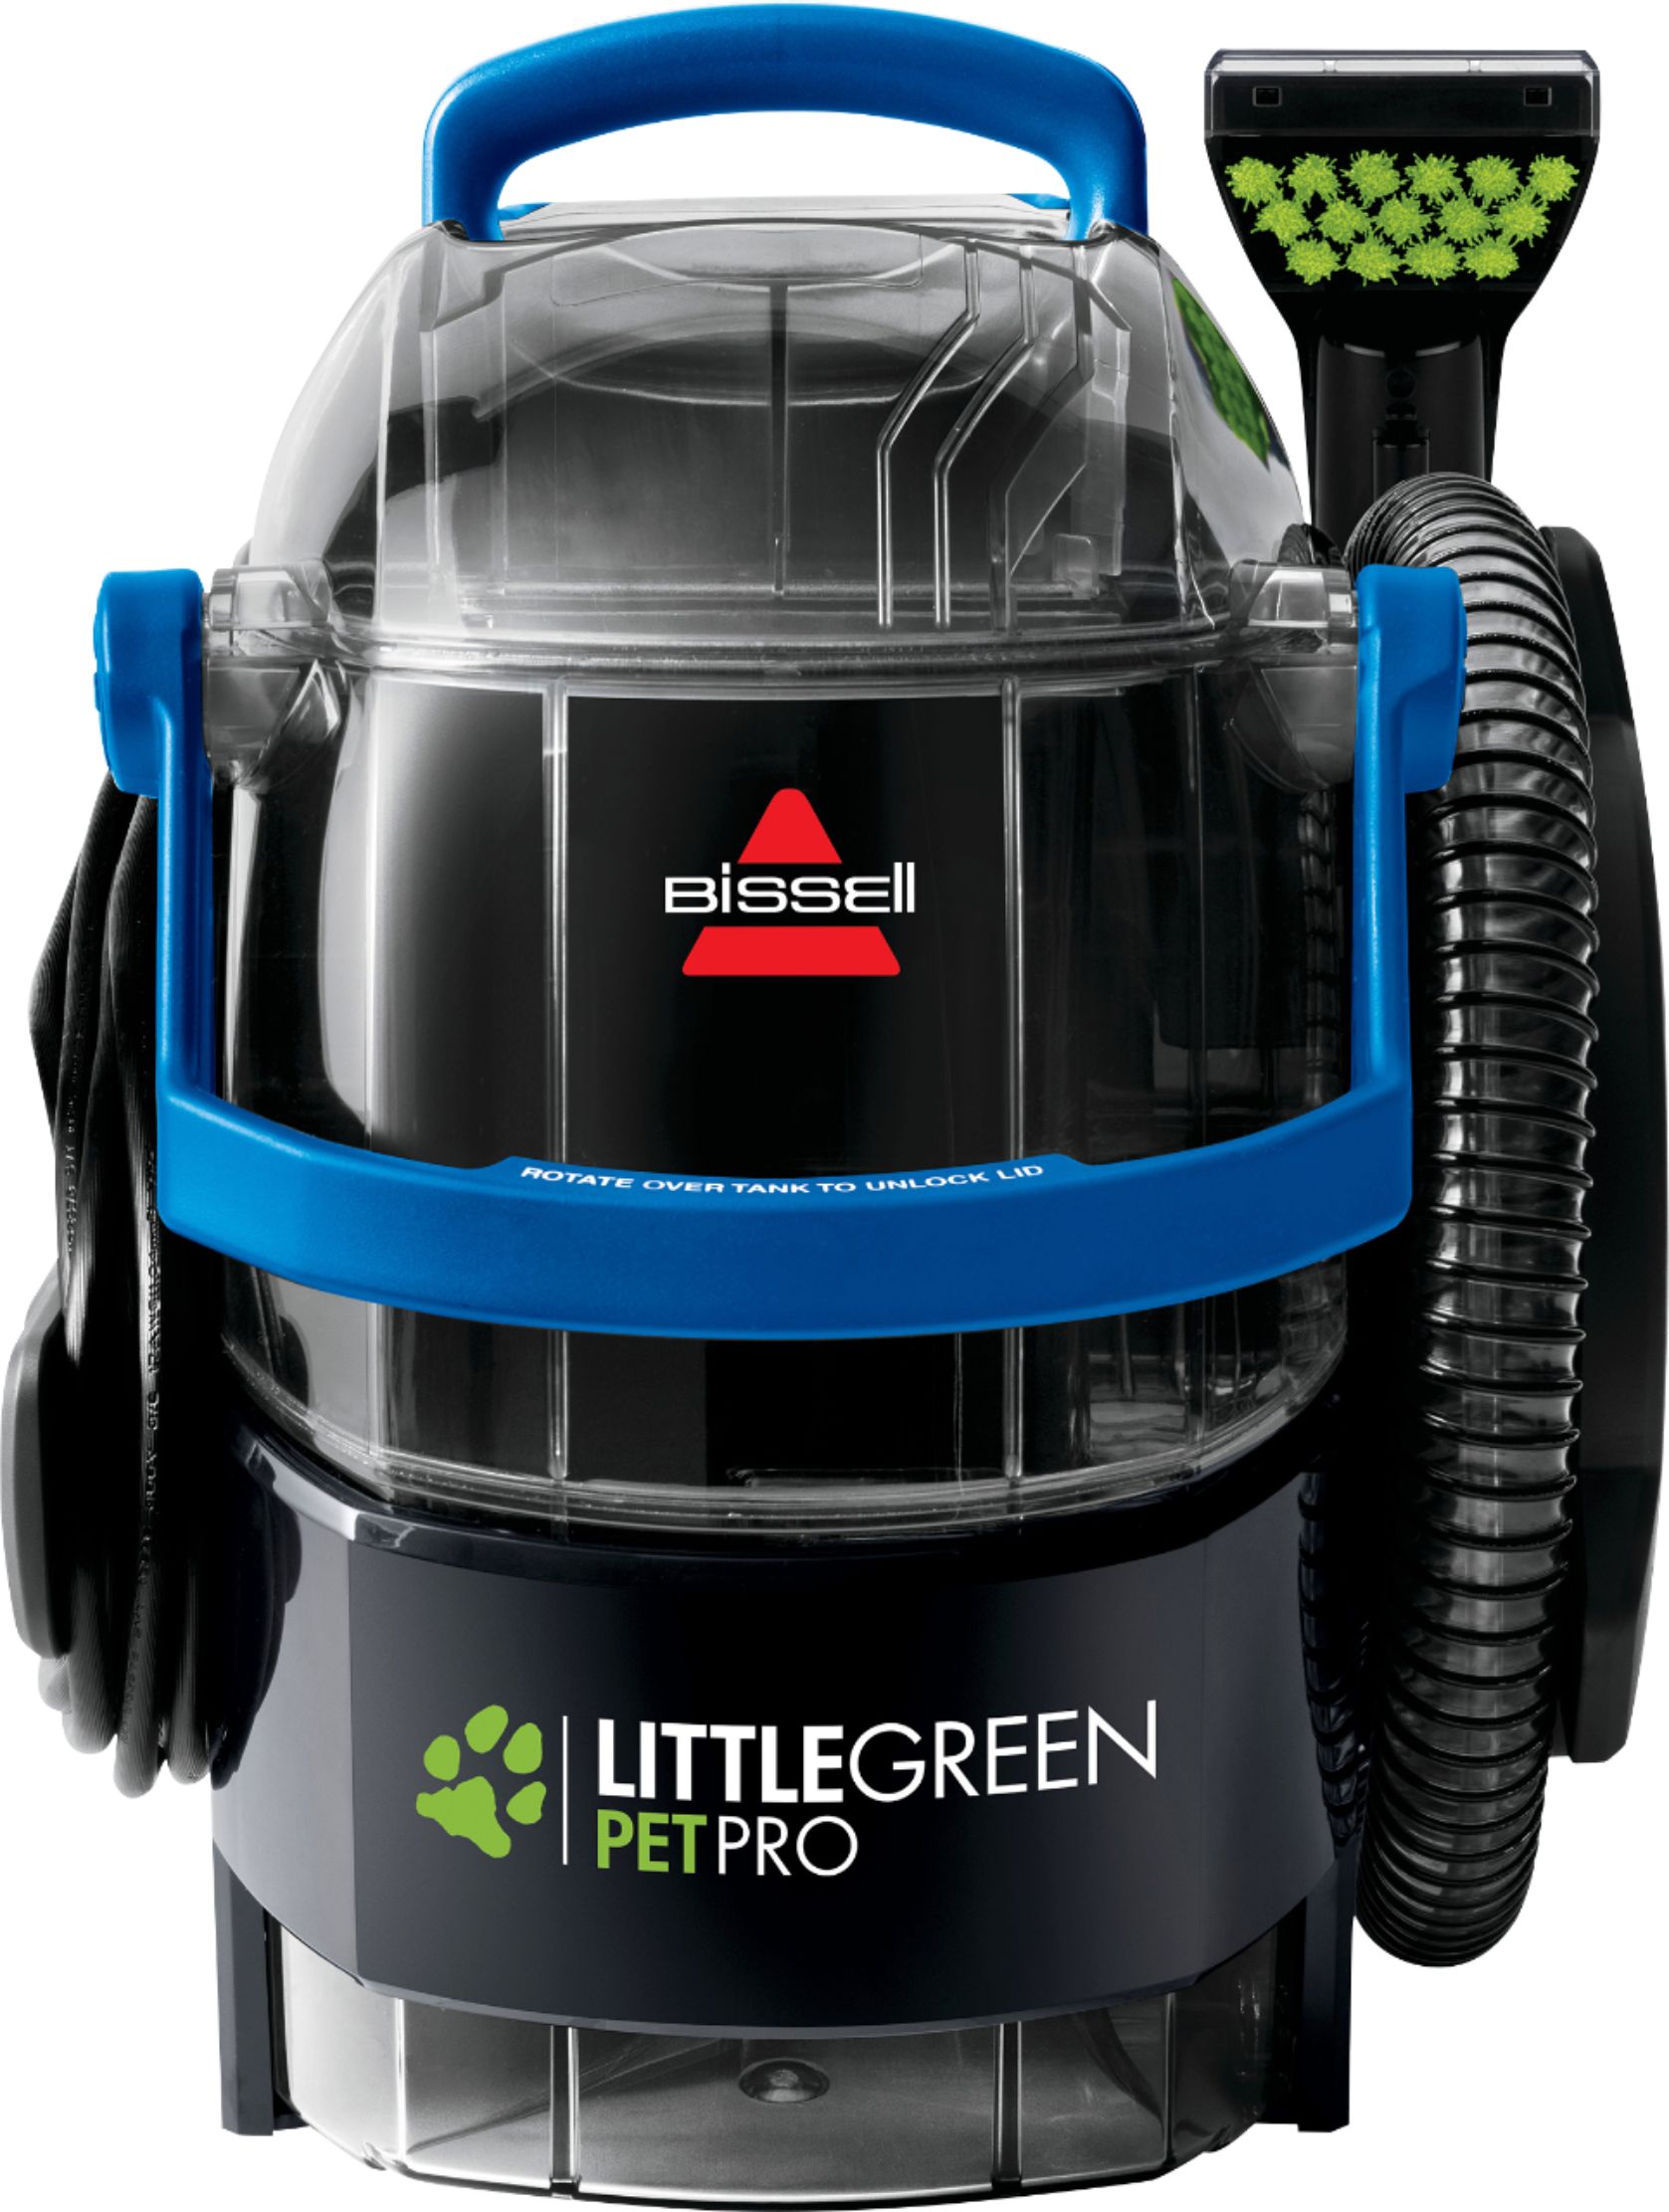 BISSELL - Little Green Pet Pro Corded Deep Cleaner | National Credit Direct